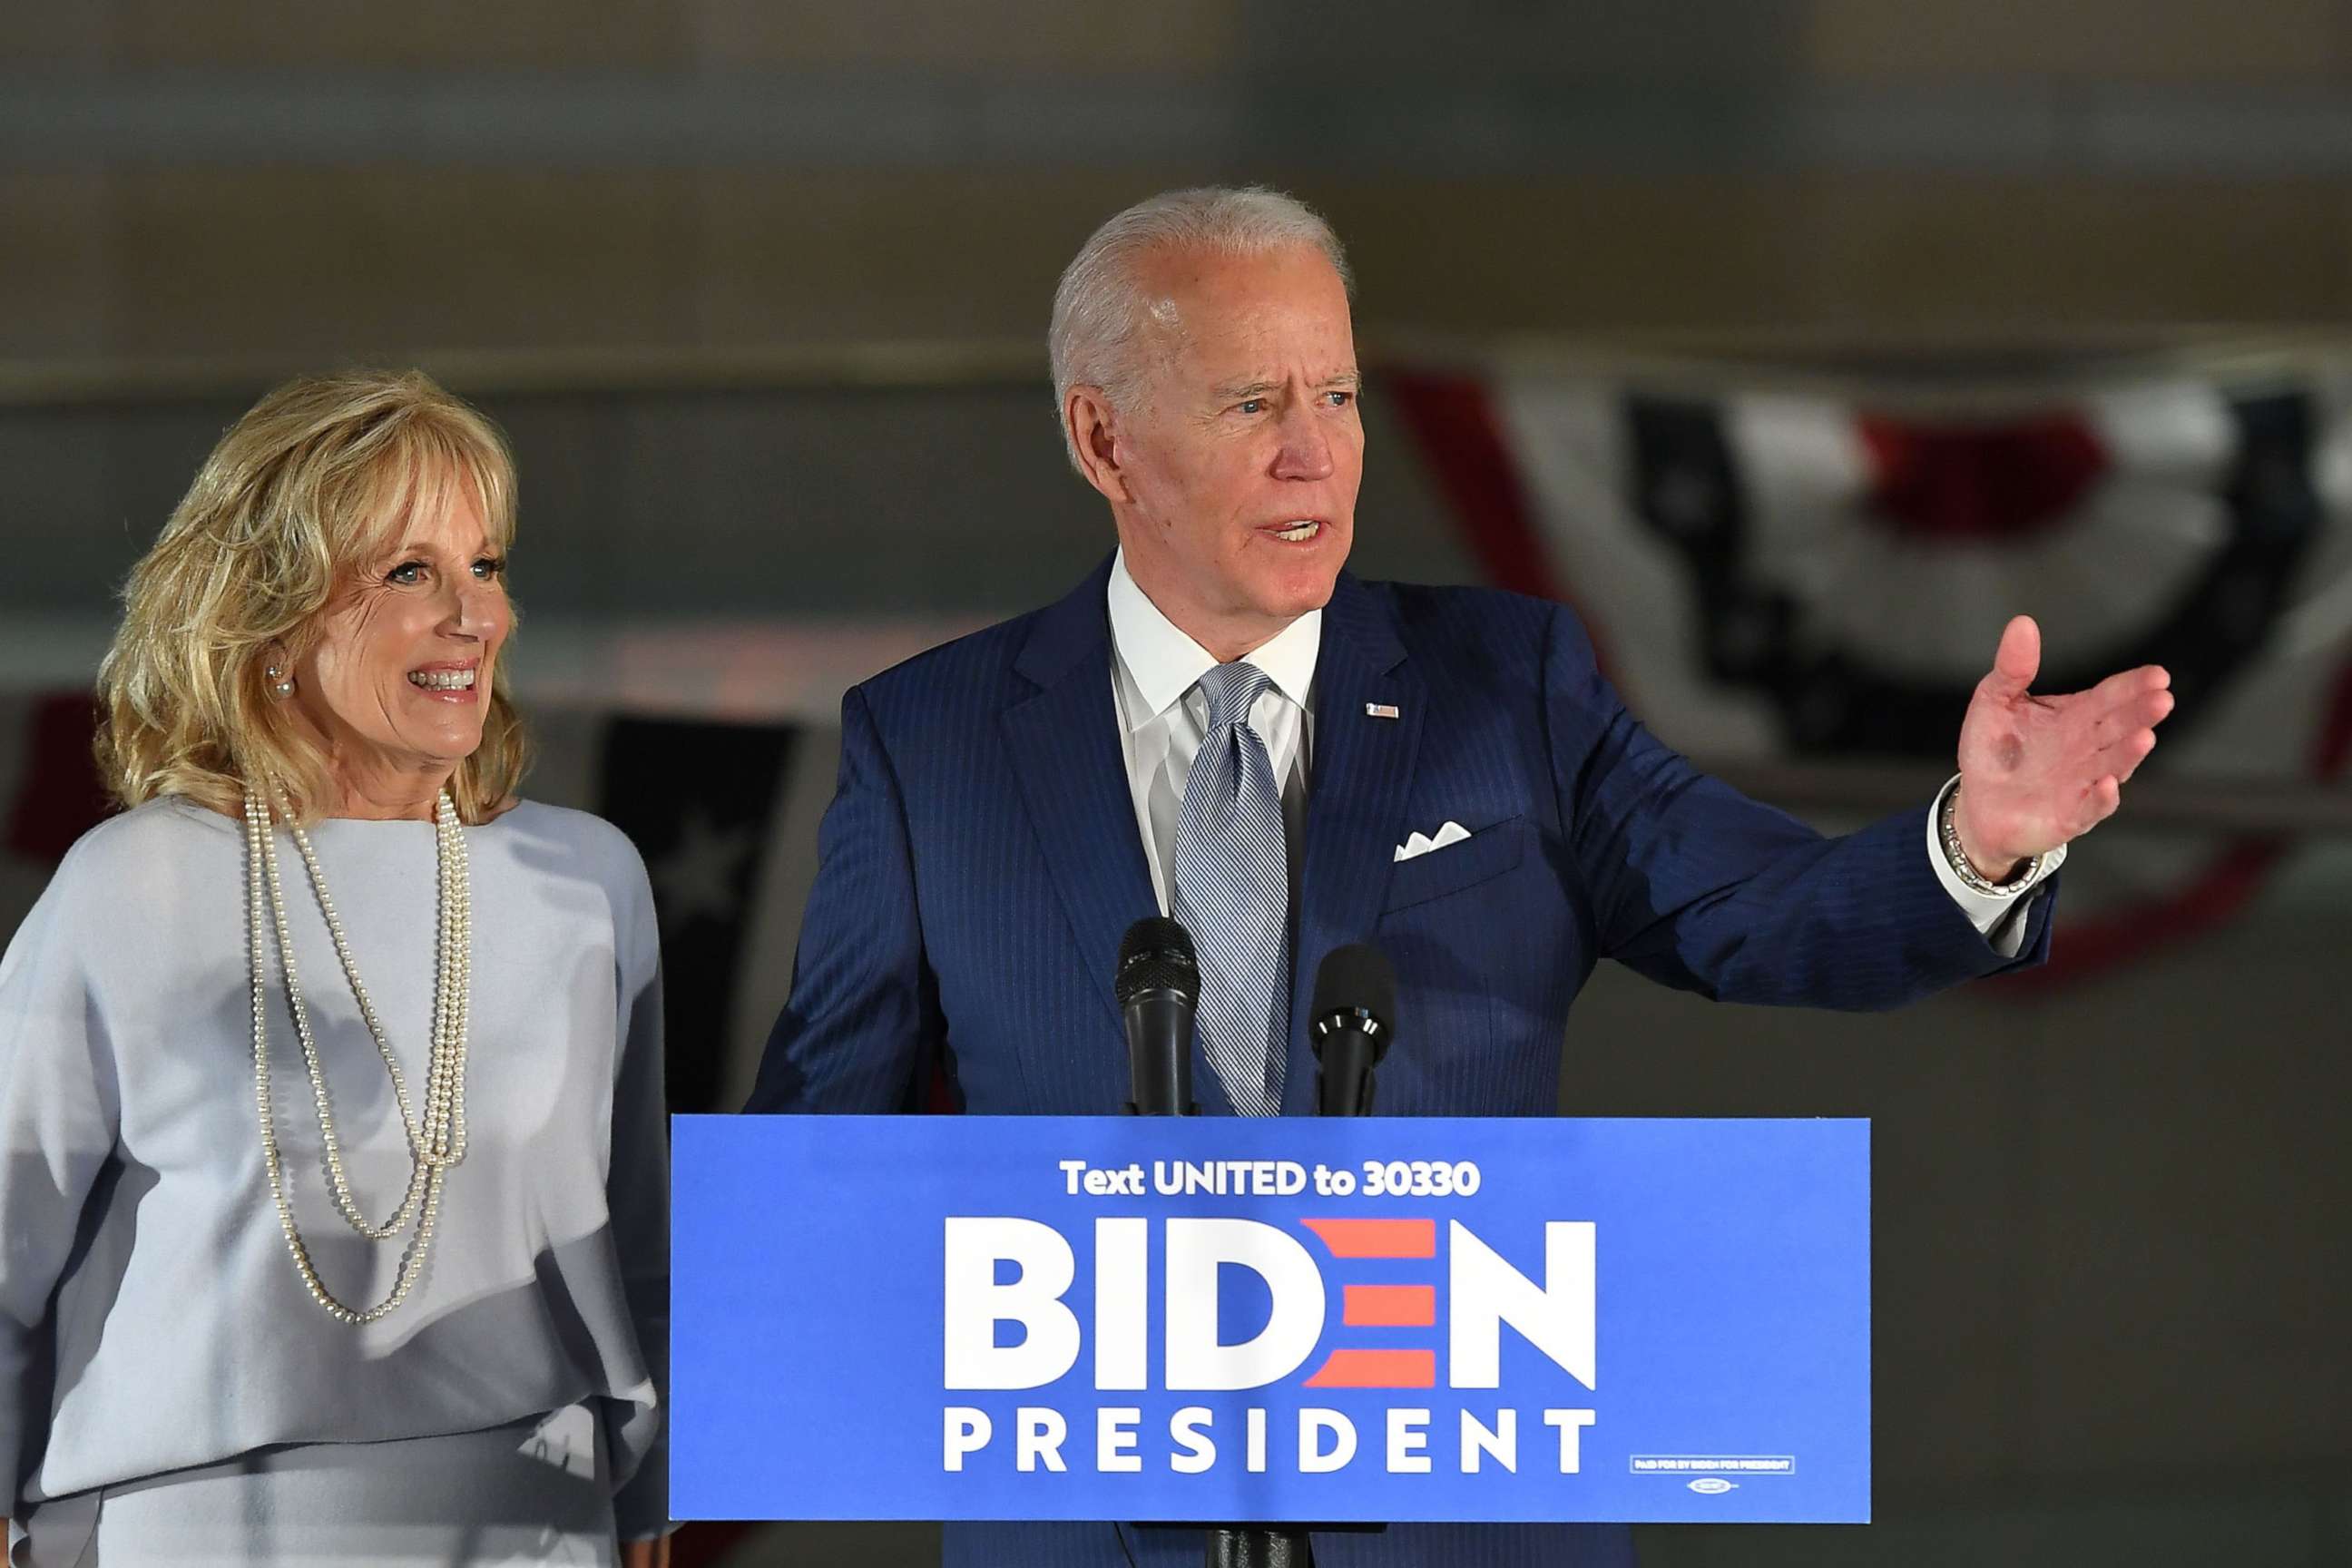 PHOTO: Democratic presidential hopeful former Vice President Joe Biden speaks, flanked by his wife Jill Biden, at the National Constitution Center in Philadelphia, March 10, 2020.